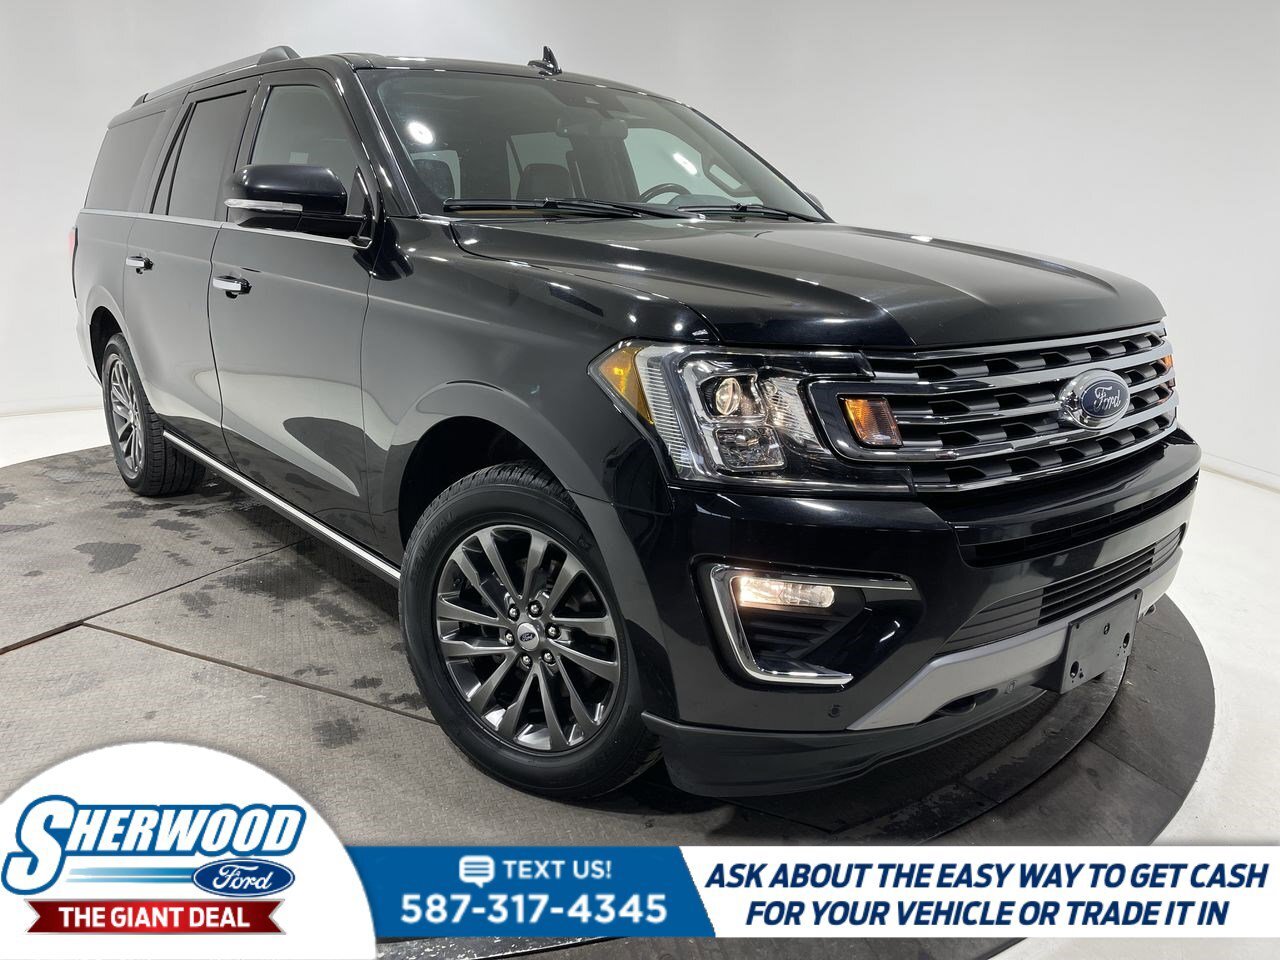 2021 Ford Expedition LTD Max- $0 Down $250 Weekly